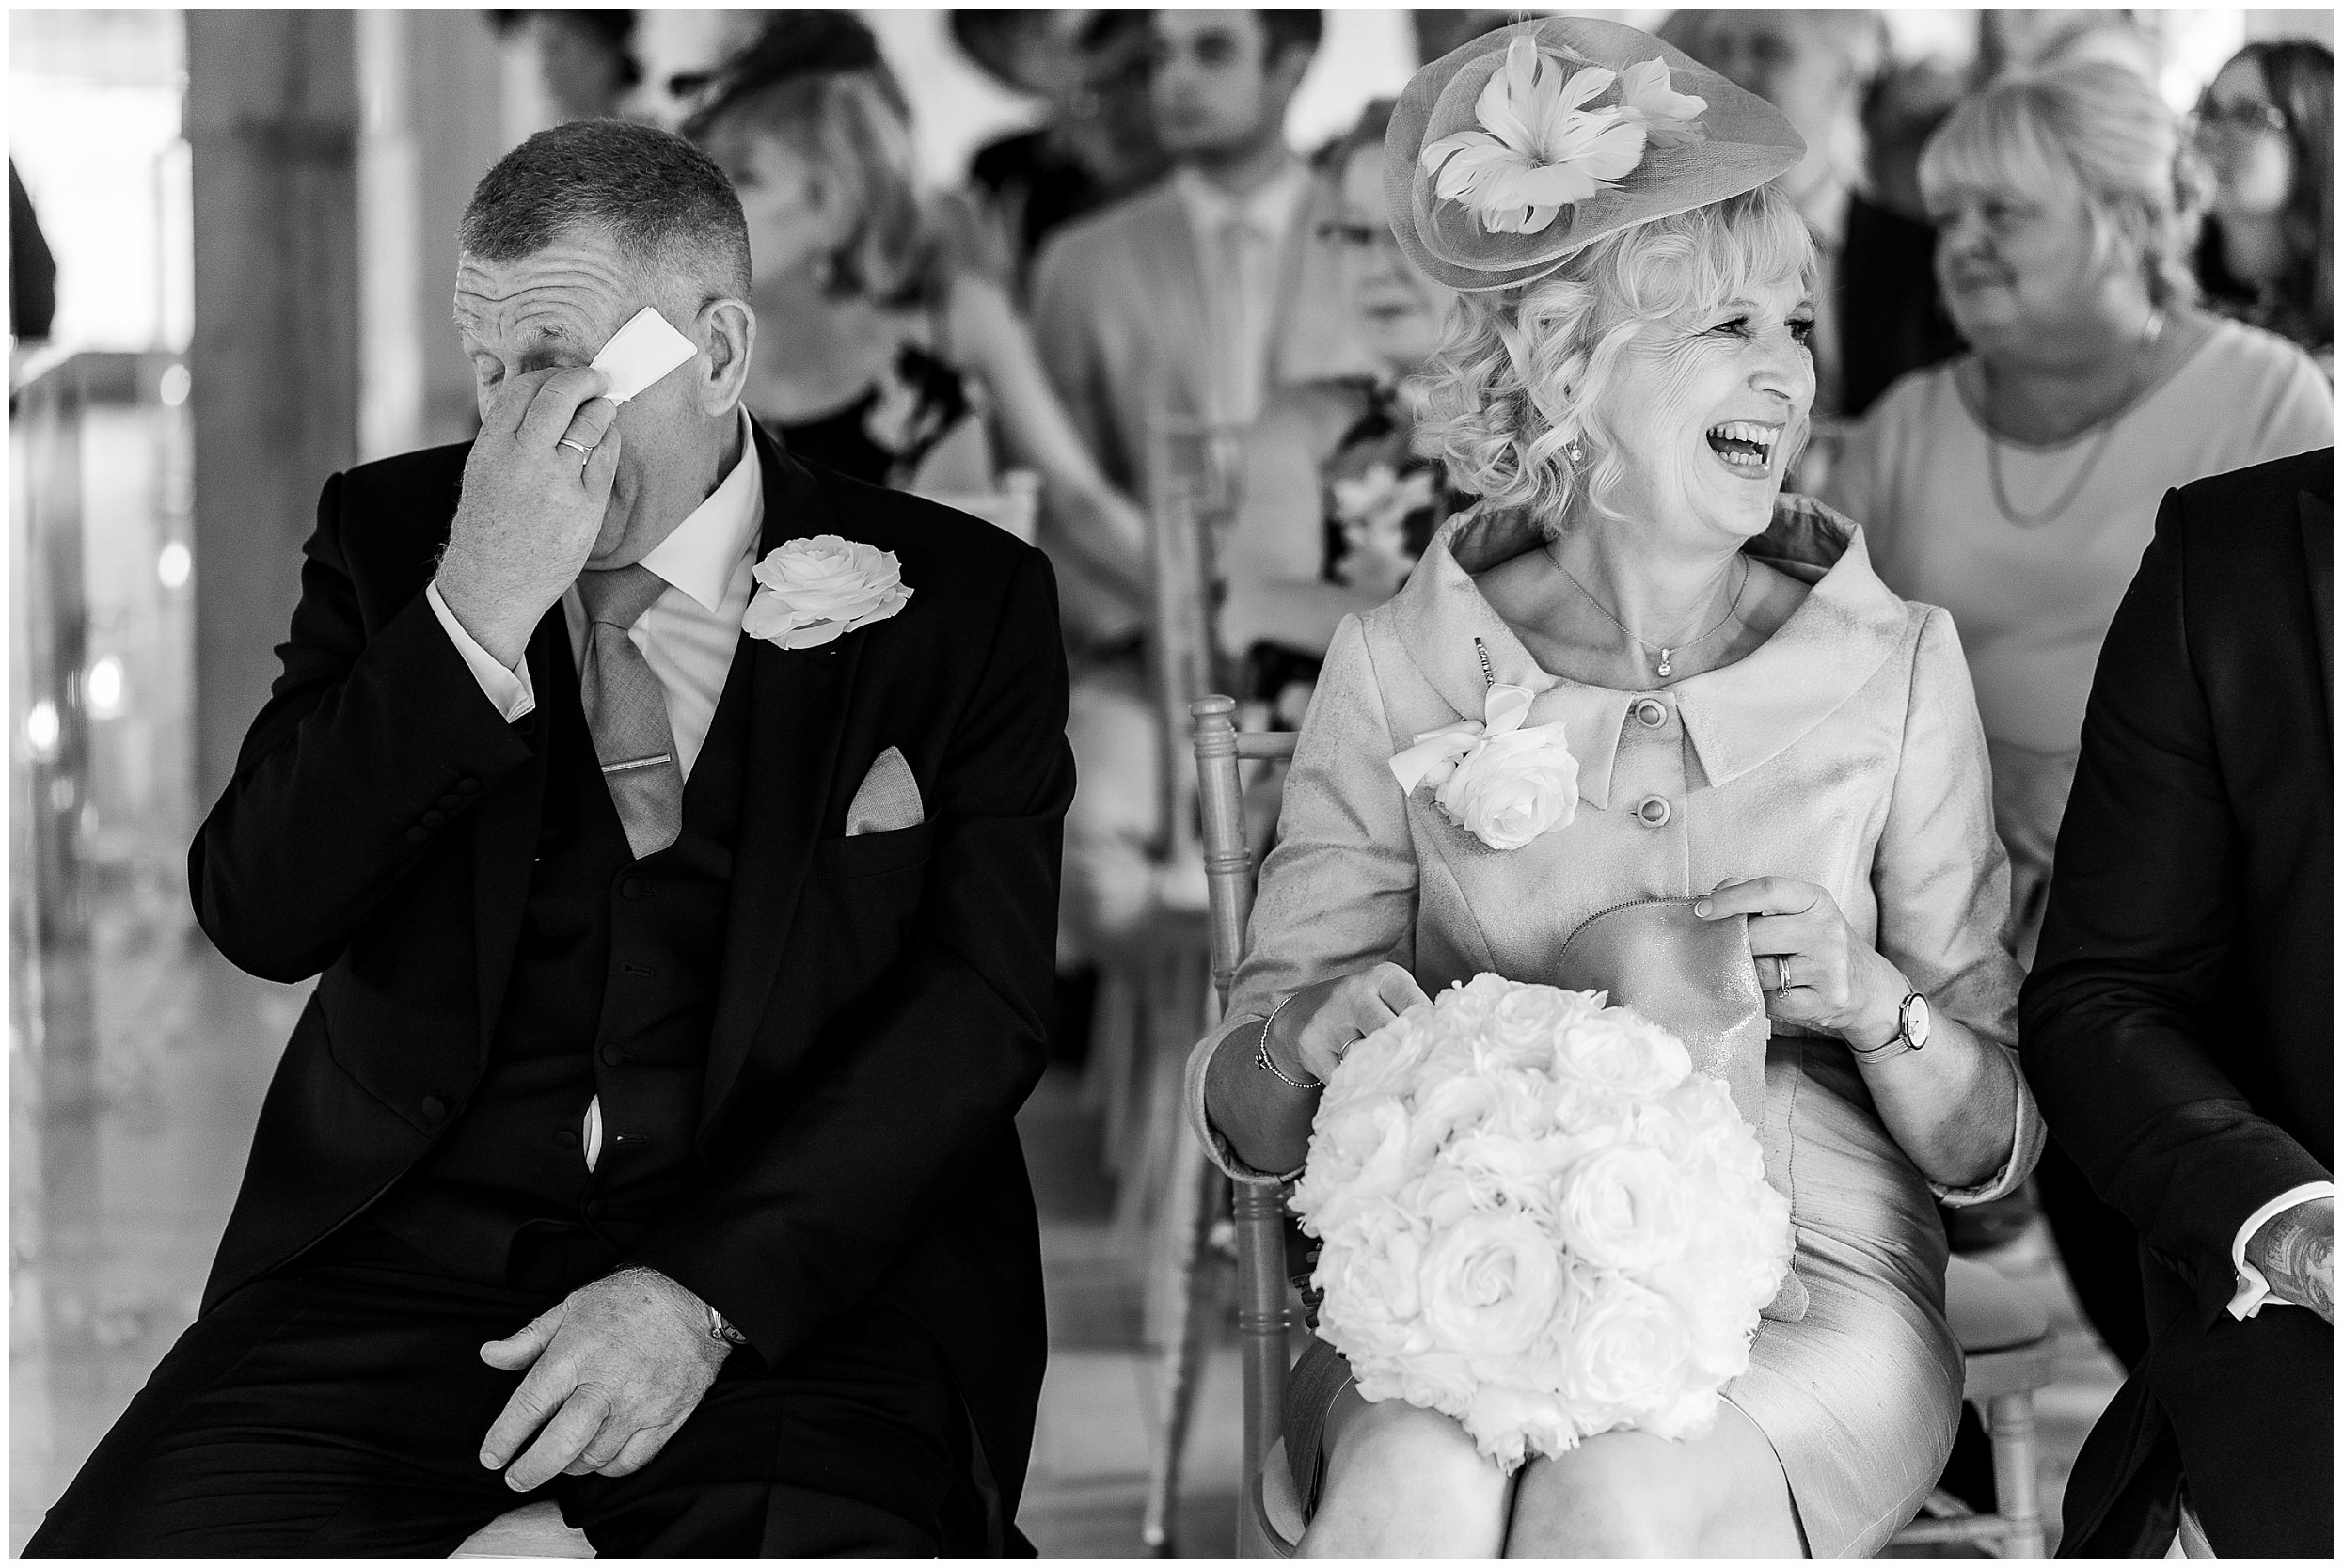 Father of the bride crying during wedding ceremony